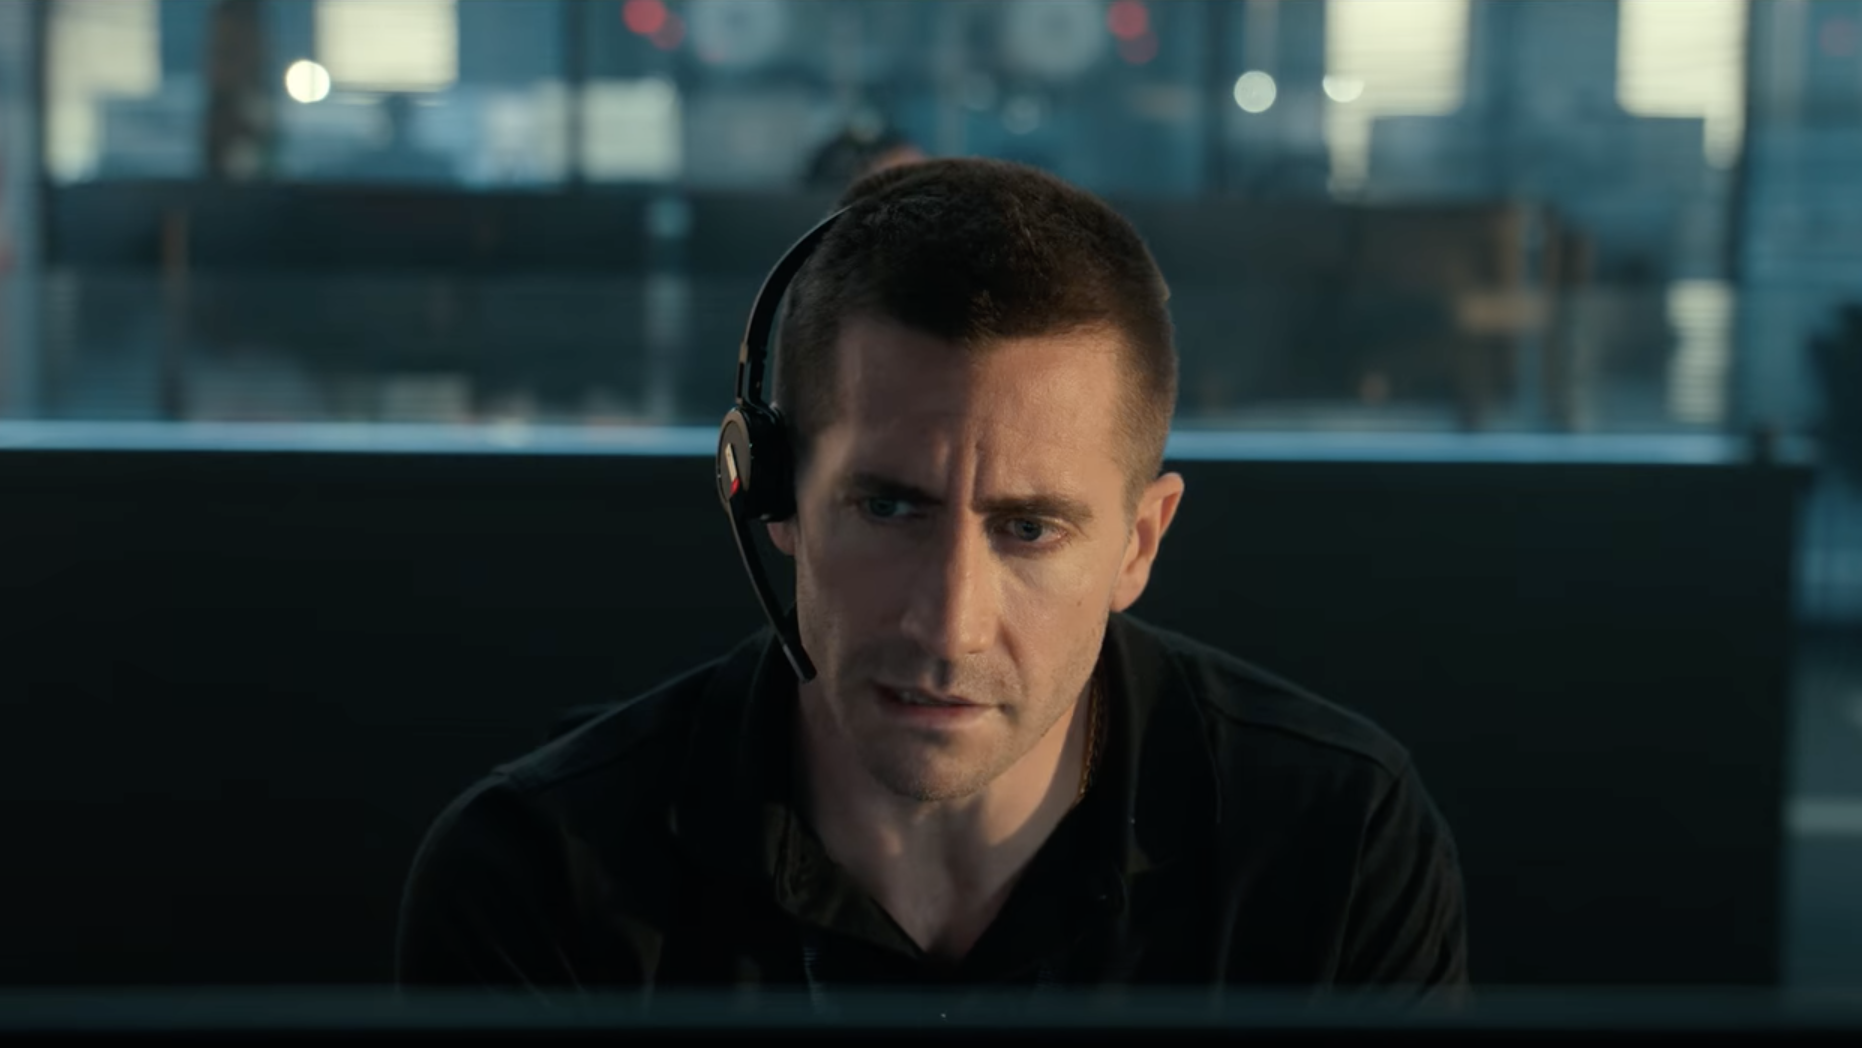 911 dispatcher Jake Gyllenhaal receives distressing call in trailer for Netflix’s The Guilty